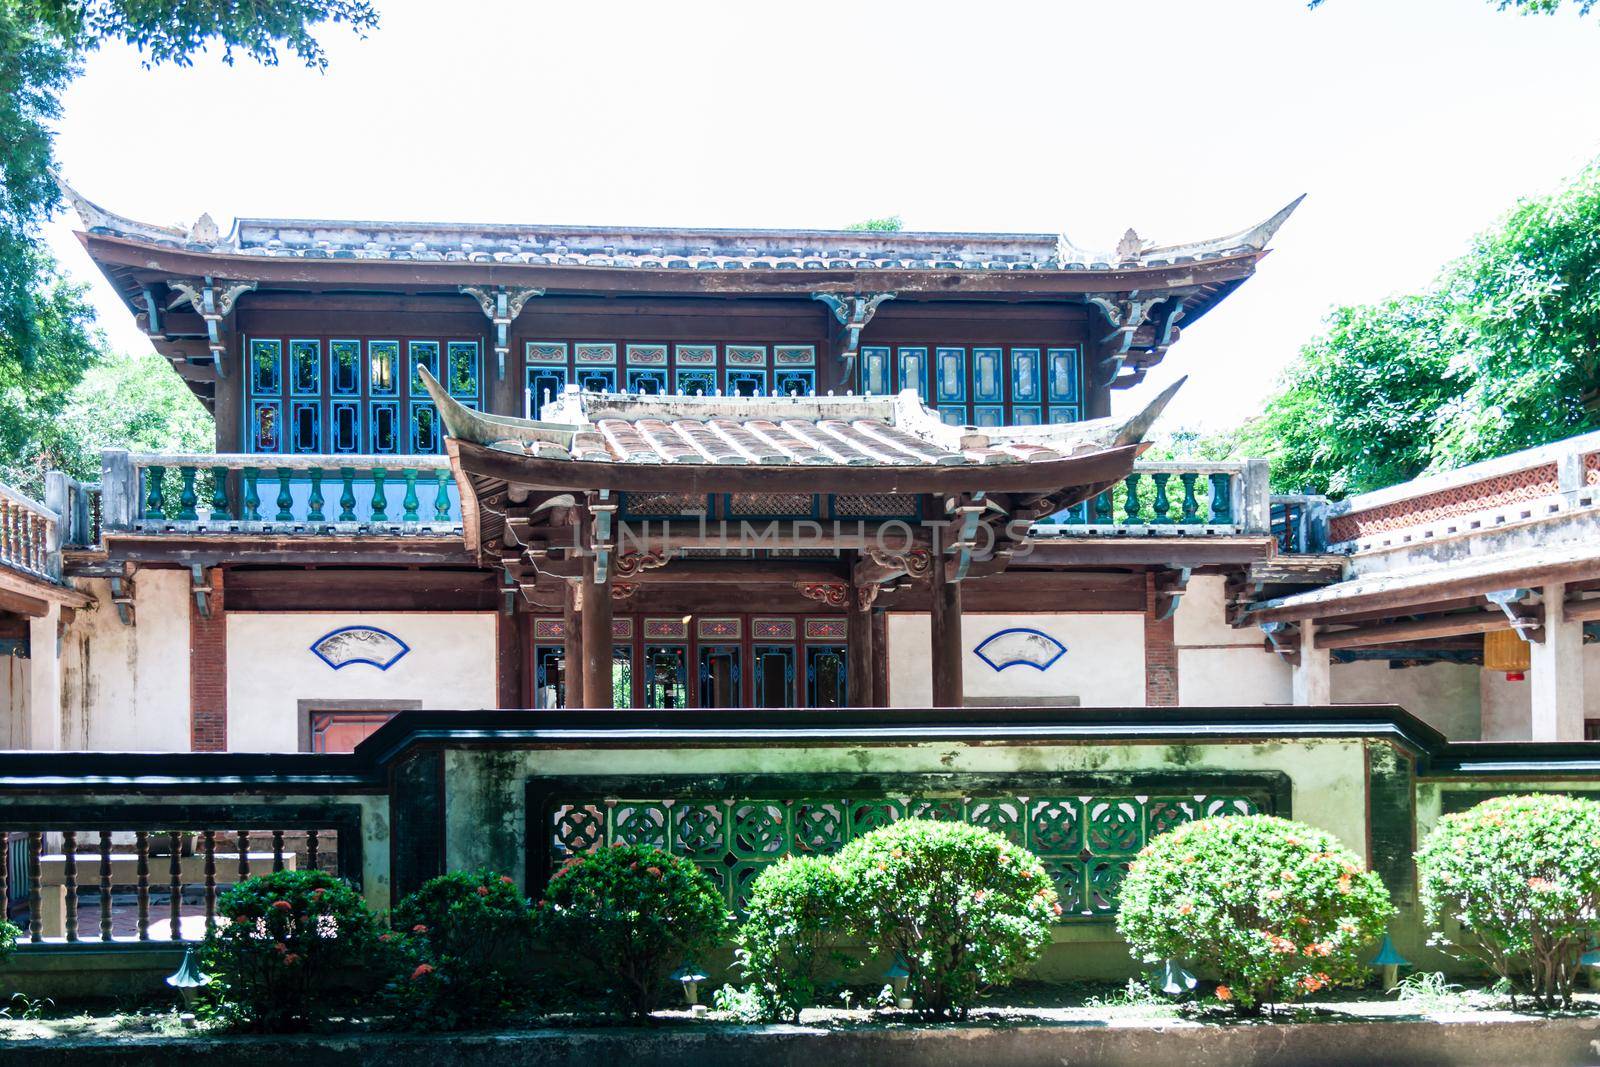 Lin Family Mansion and Garden. Lin pei family garden is a traditional Chinese house in Taiwan